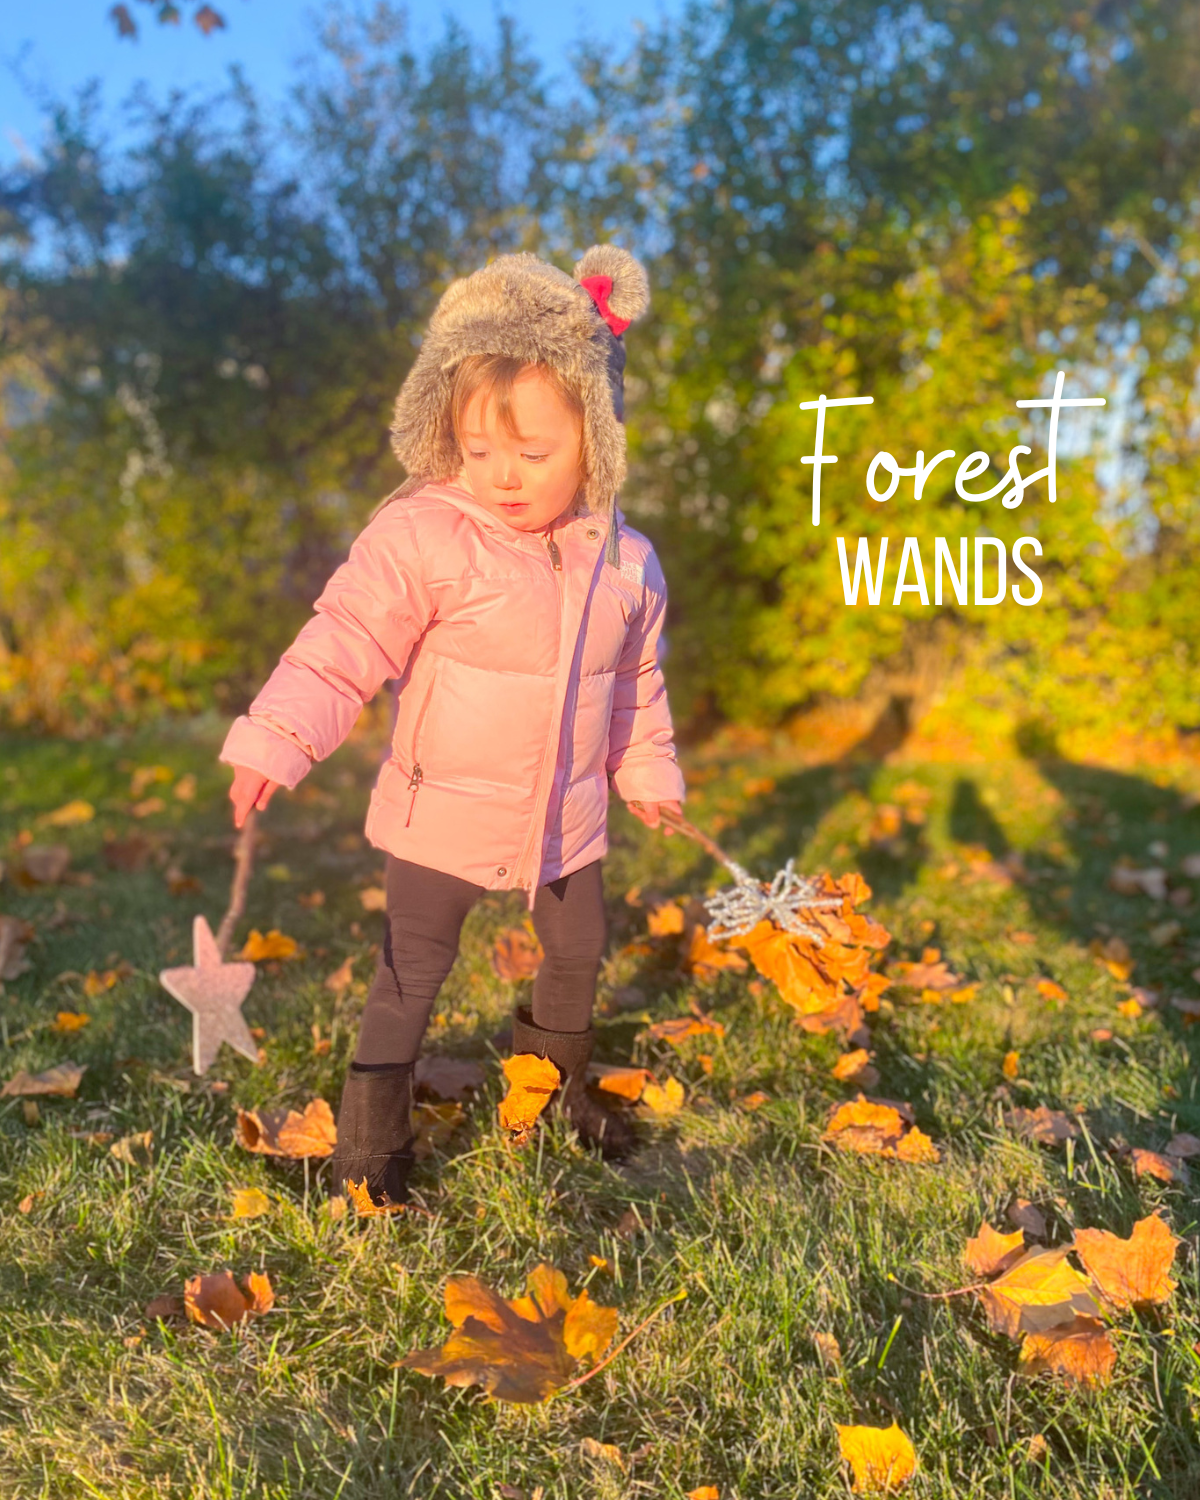 Fall-crafts-for-kids-magical-forest-wands-girl.png